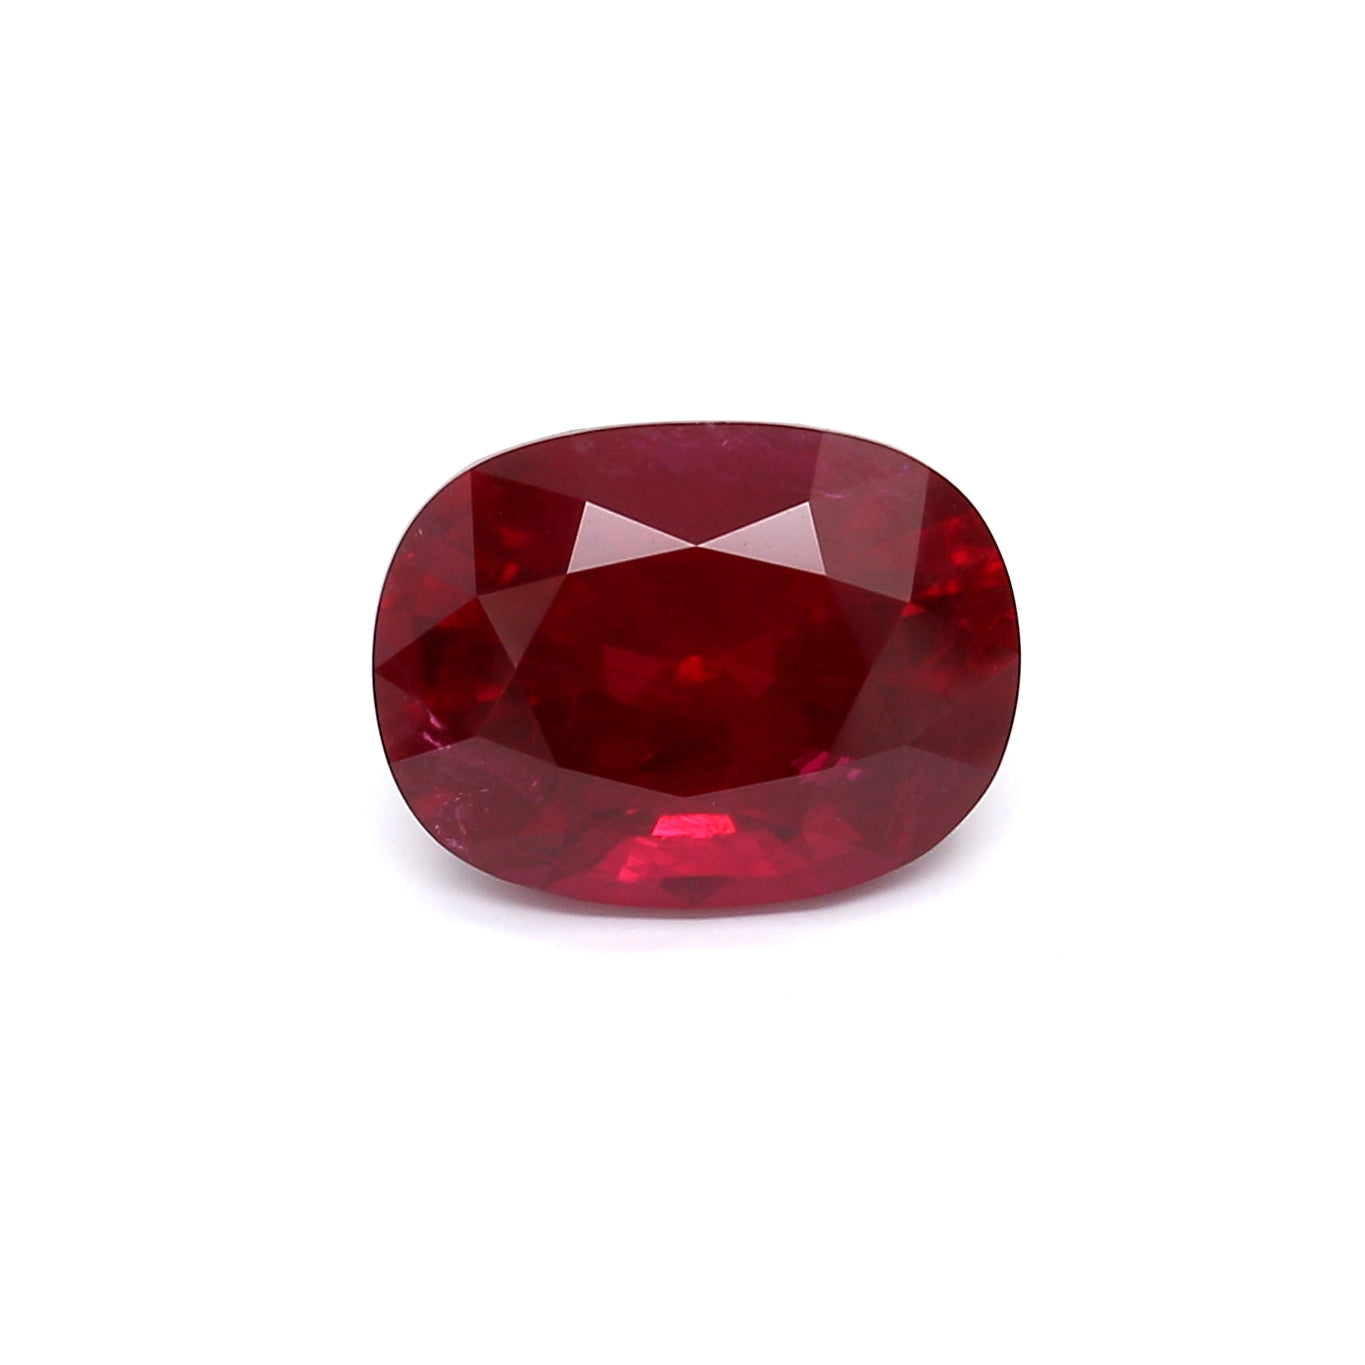 5.18ct Vivid Red, Oval Ruby, H(a), Mozambique - 11.37 x 8.62 x 6.58mm